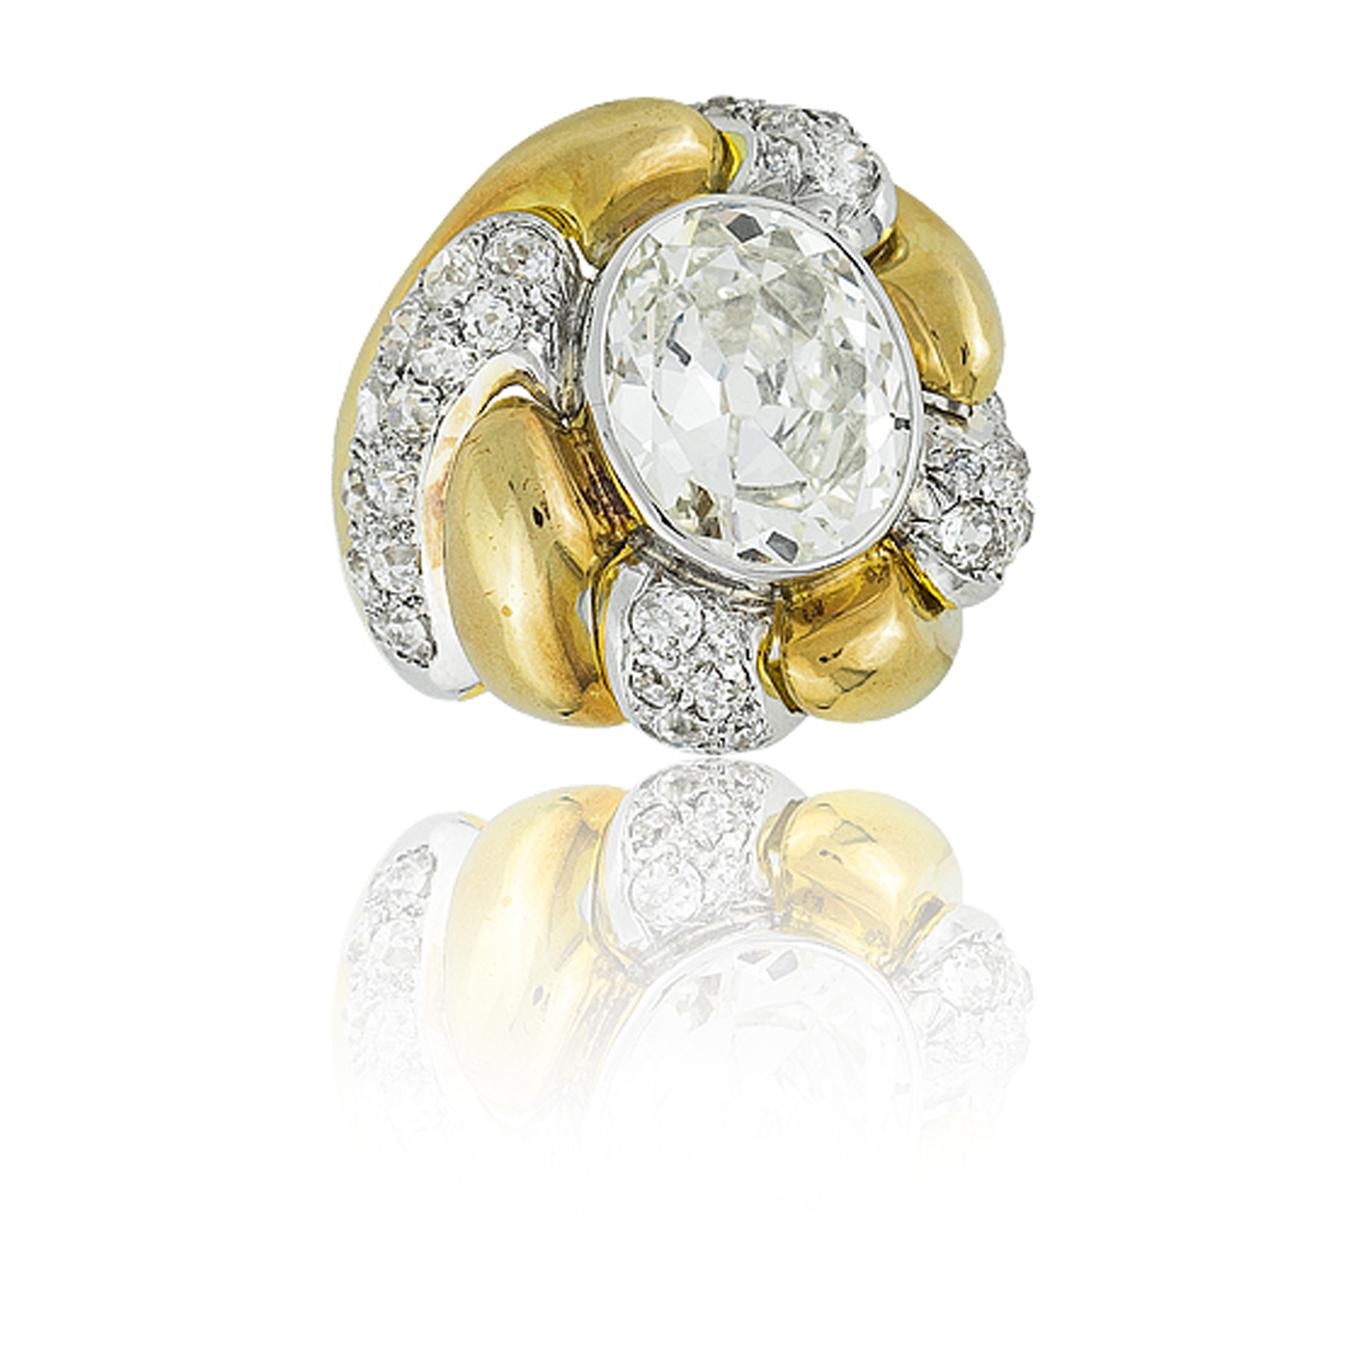 Suzanne Belperron Platinum 18K Yellow Gold & Diamond “Tourbillon” Ring; Oval Cut Diamond  approx 5.40ct ;  Poinçon for Groene et Darde; French, Ca 1942
see: Suzanne Belperron by Sylvie Raulet / Olivier Baroin, pg 292